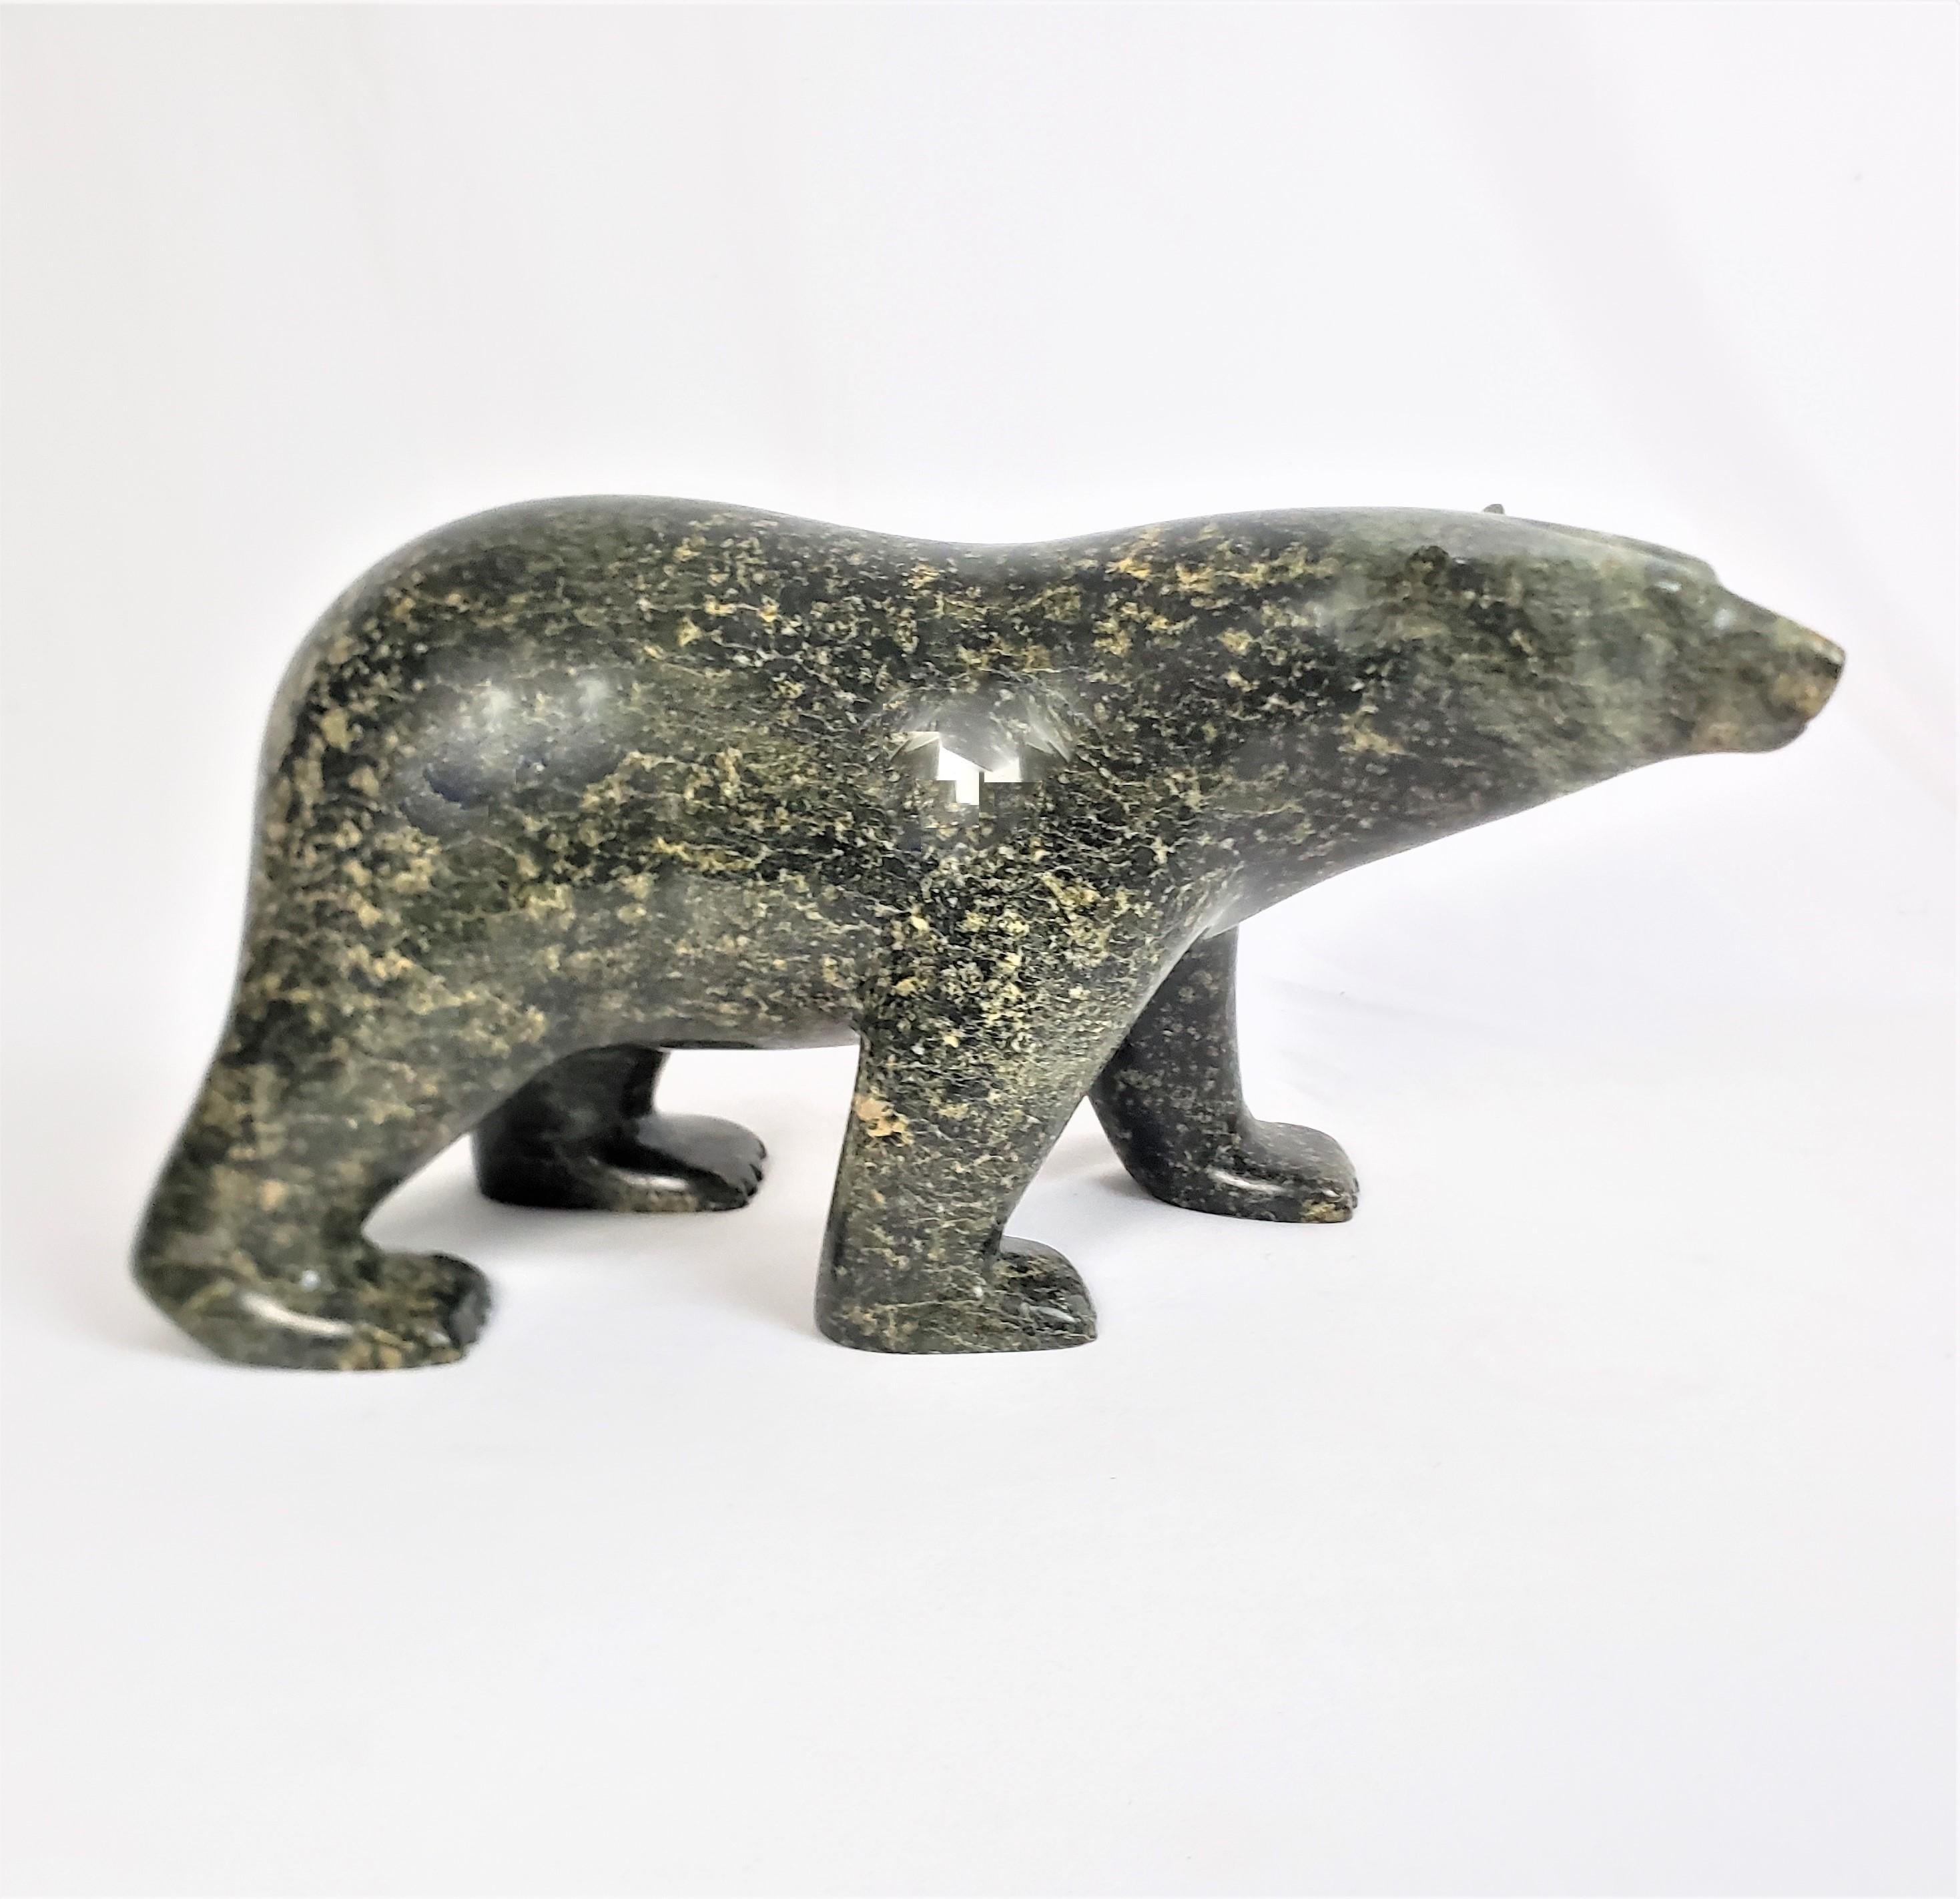 This large and well executed carved bear sculpture was done by the renowned Ashevak Adla of Canada in approximately 1999 in his signature Inuit style. The carving is composed of serpentine stone, which has been masterfully carved to depict a walking